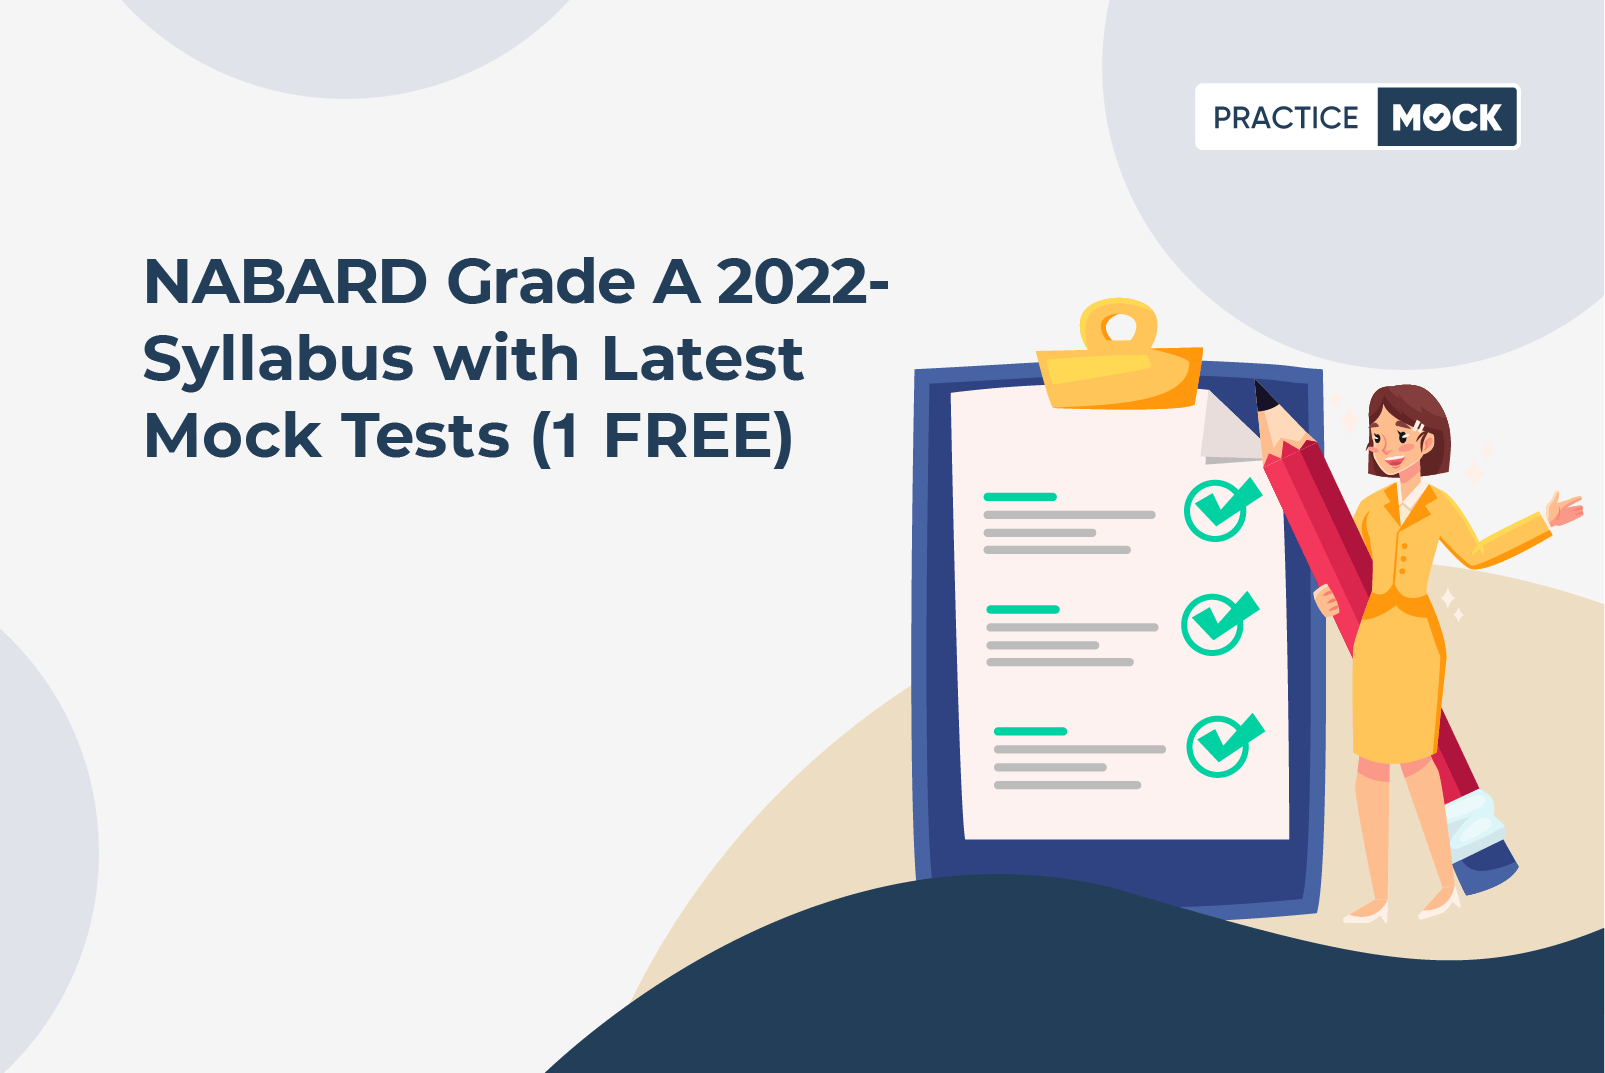 NABARD Grade A 2022-Syllabus with latest Mock Tests